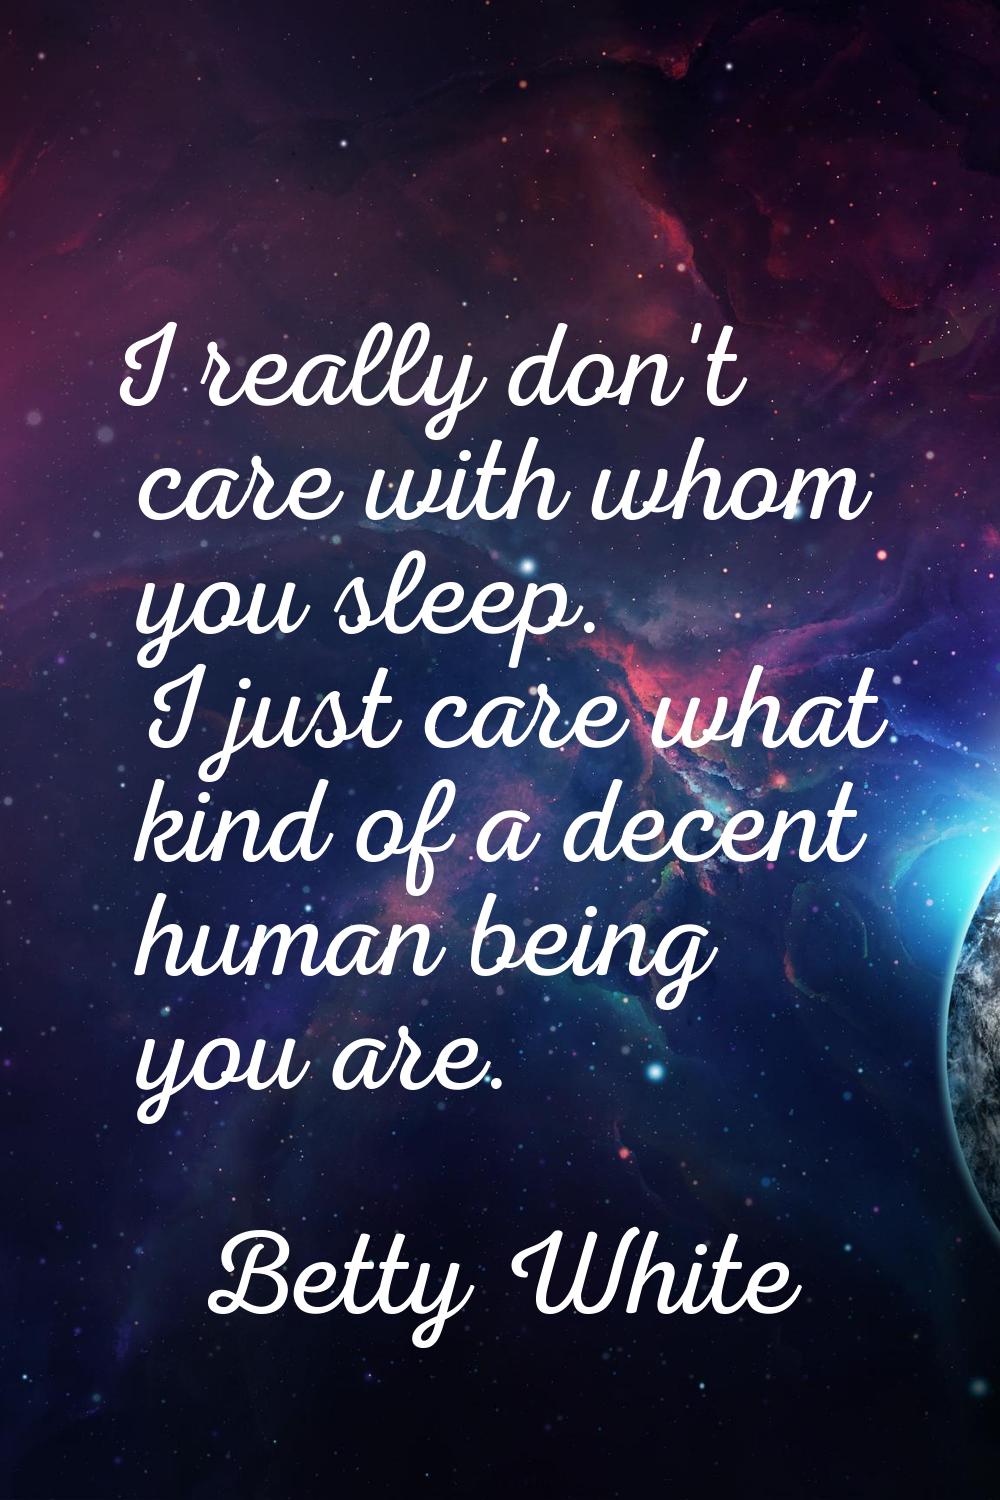 I really don't care with whom you sleep. I just care what kind of a decent human being you are.